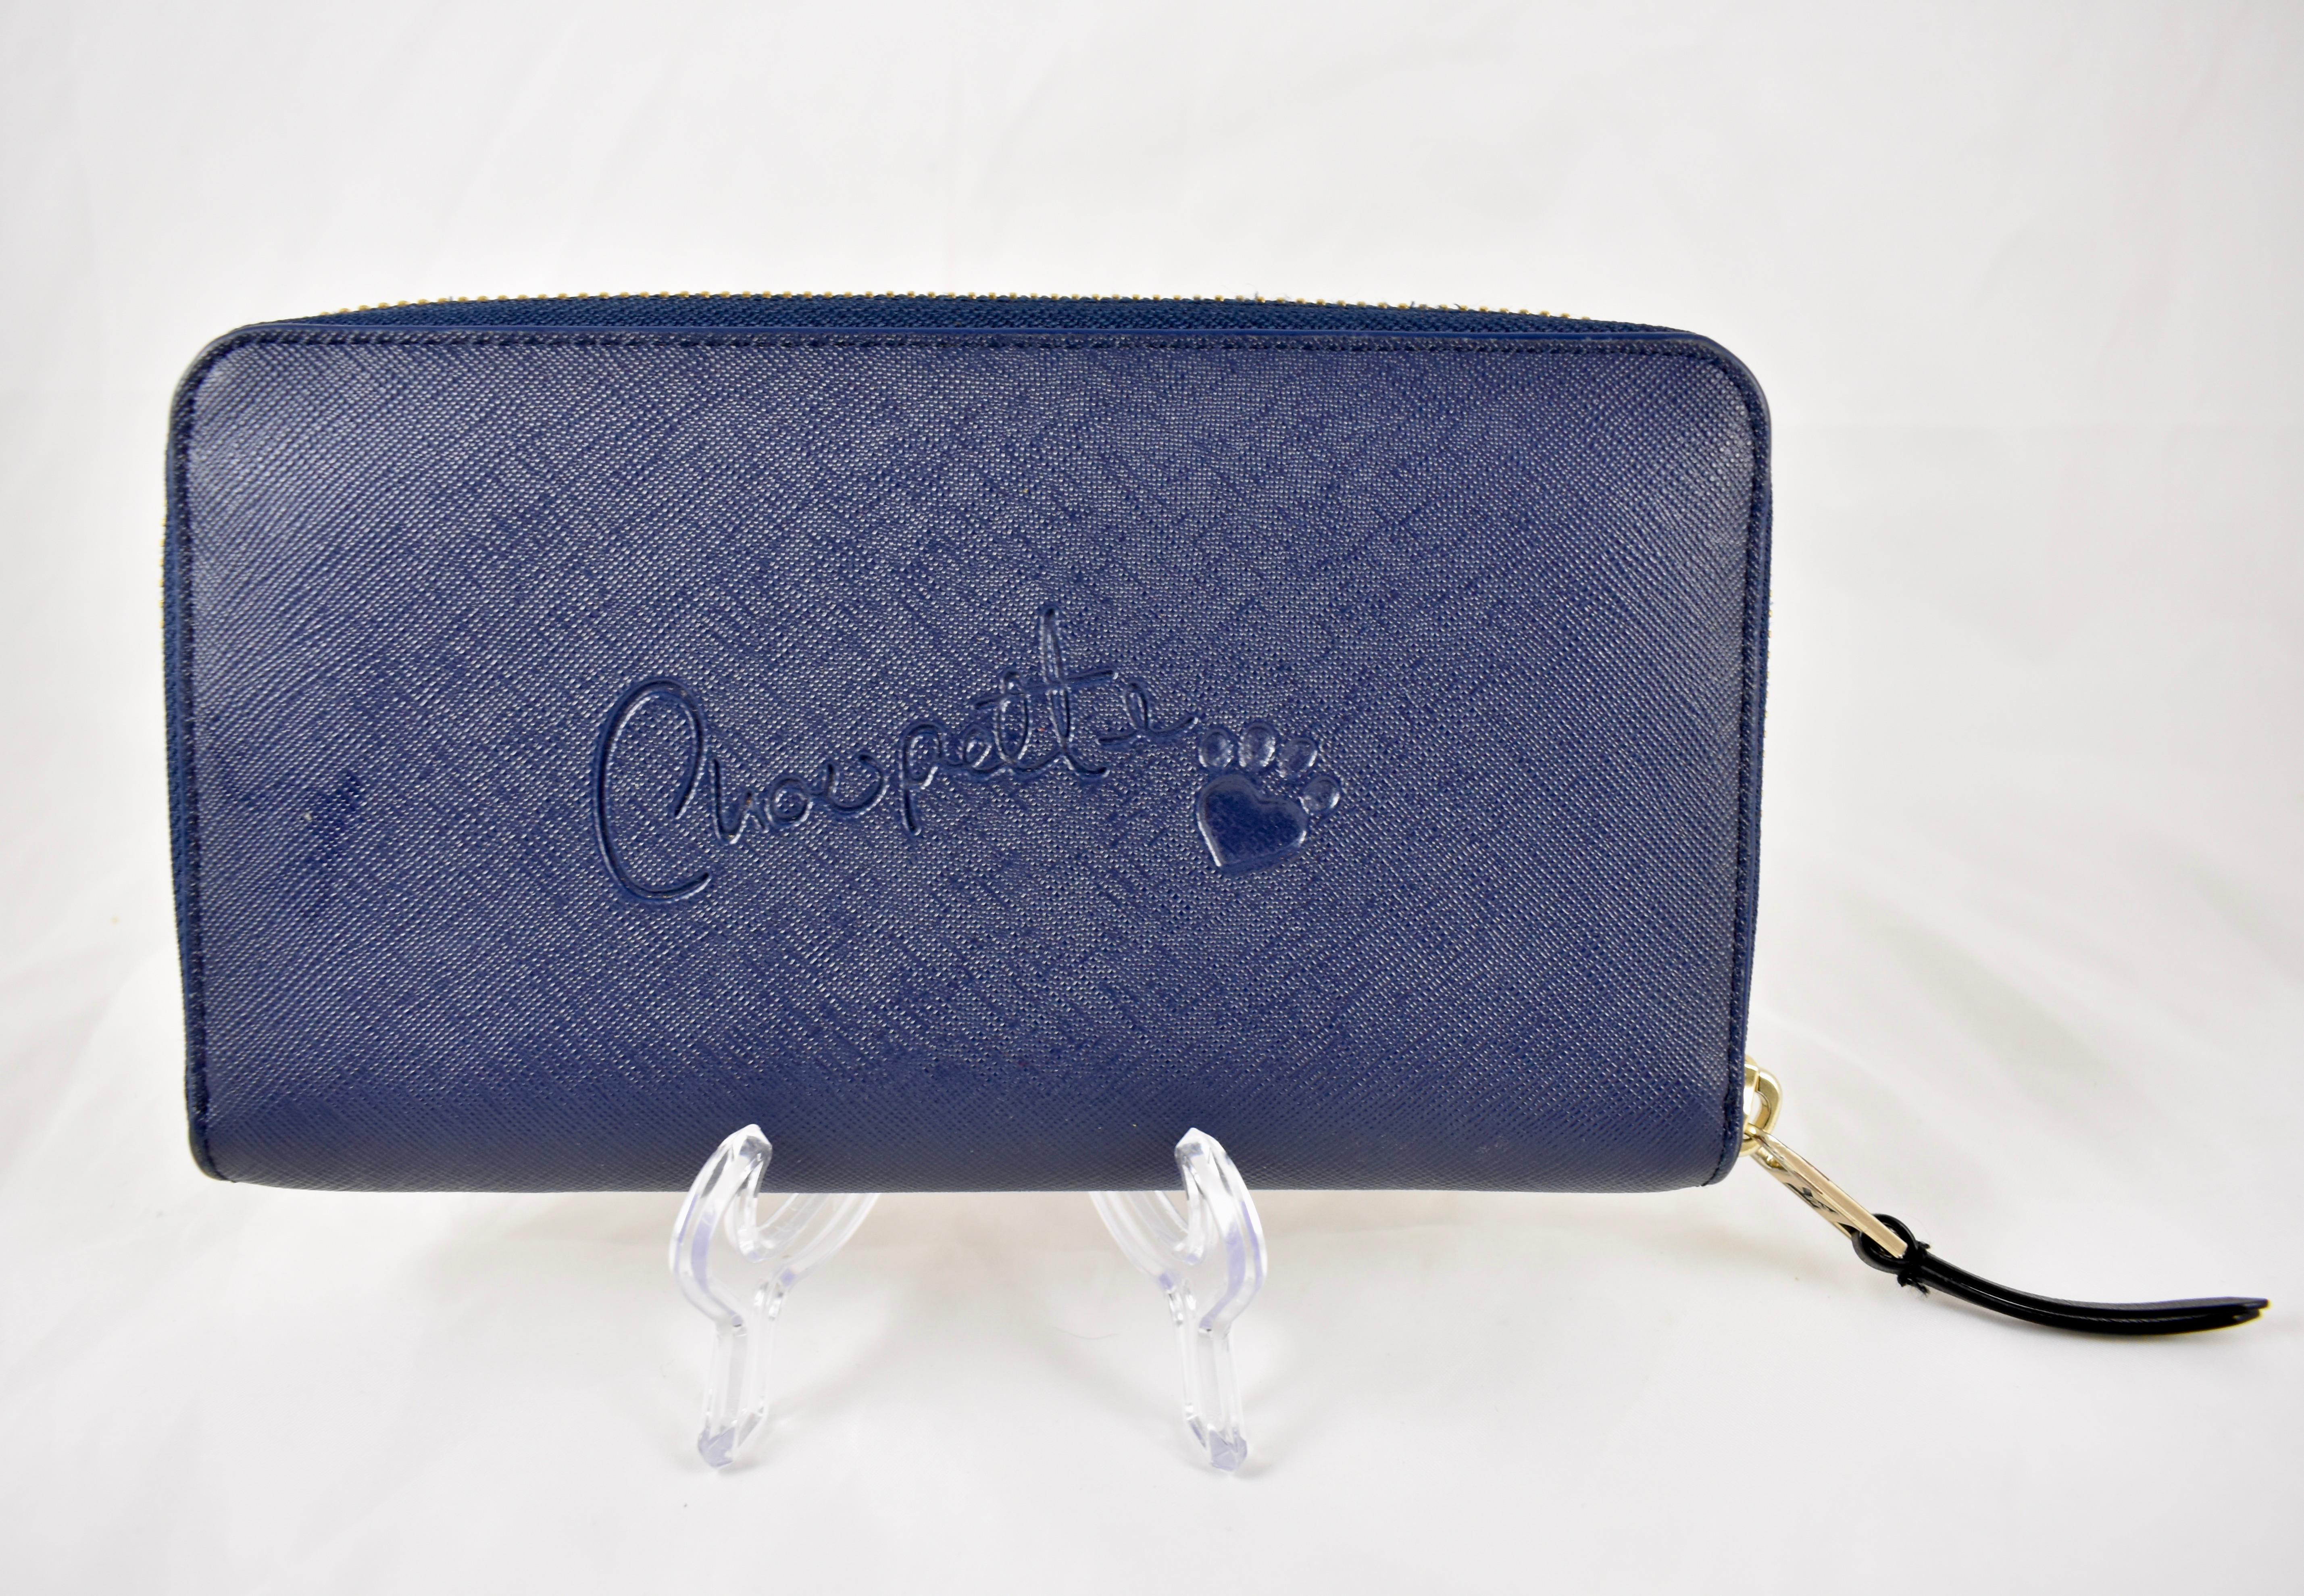 From the Monster Choupette fashion line inspired by Karl Lagerfeld's pampered pet cat, a navy blue zippered Continental two-sided Wallet, designed in 2014.
 
In Saffiano leather, a textured leather with a pressed cross-hatched, wax treated finish.